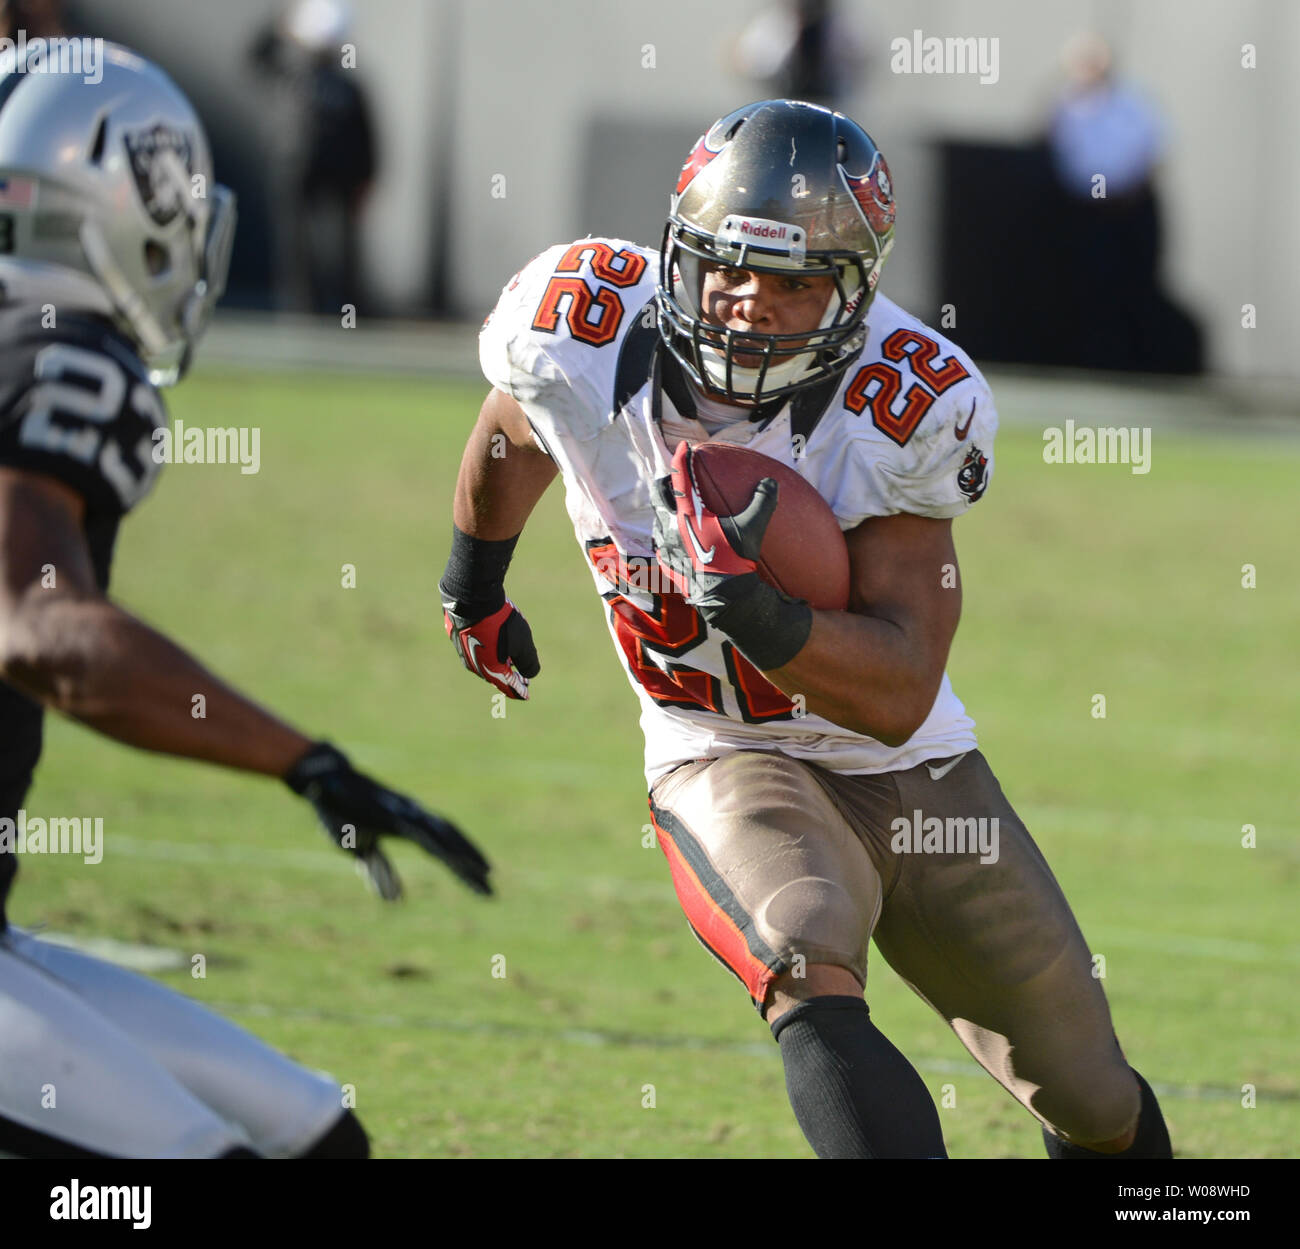 Tampa Bay Buccaneers RB Doug Martin (22) runs against Oakland Raiders Joselio Hanson (23) at O.co Coliseum in Oakland, California on November 4, 2012. Martin was a one man wrecking crew amassing 251yards and four TD's in the Bucs 42-32 victory.   UPI/Terry Schmitt Stock Photo